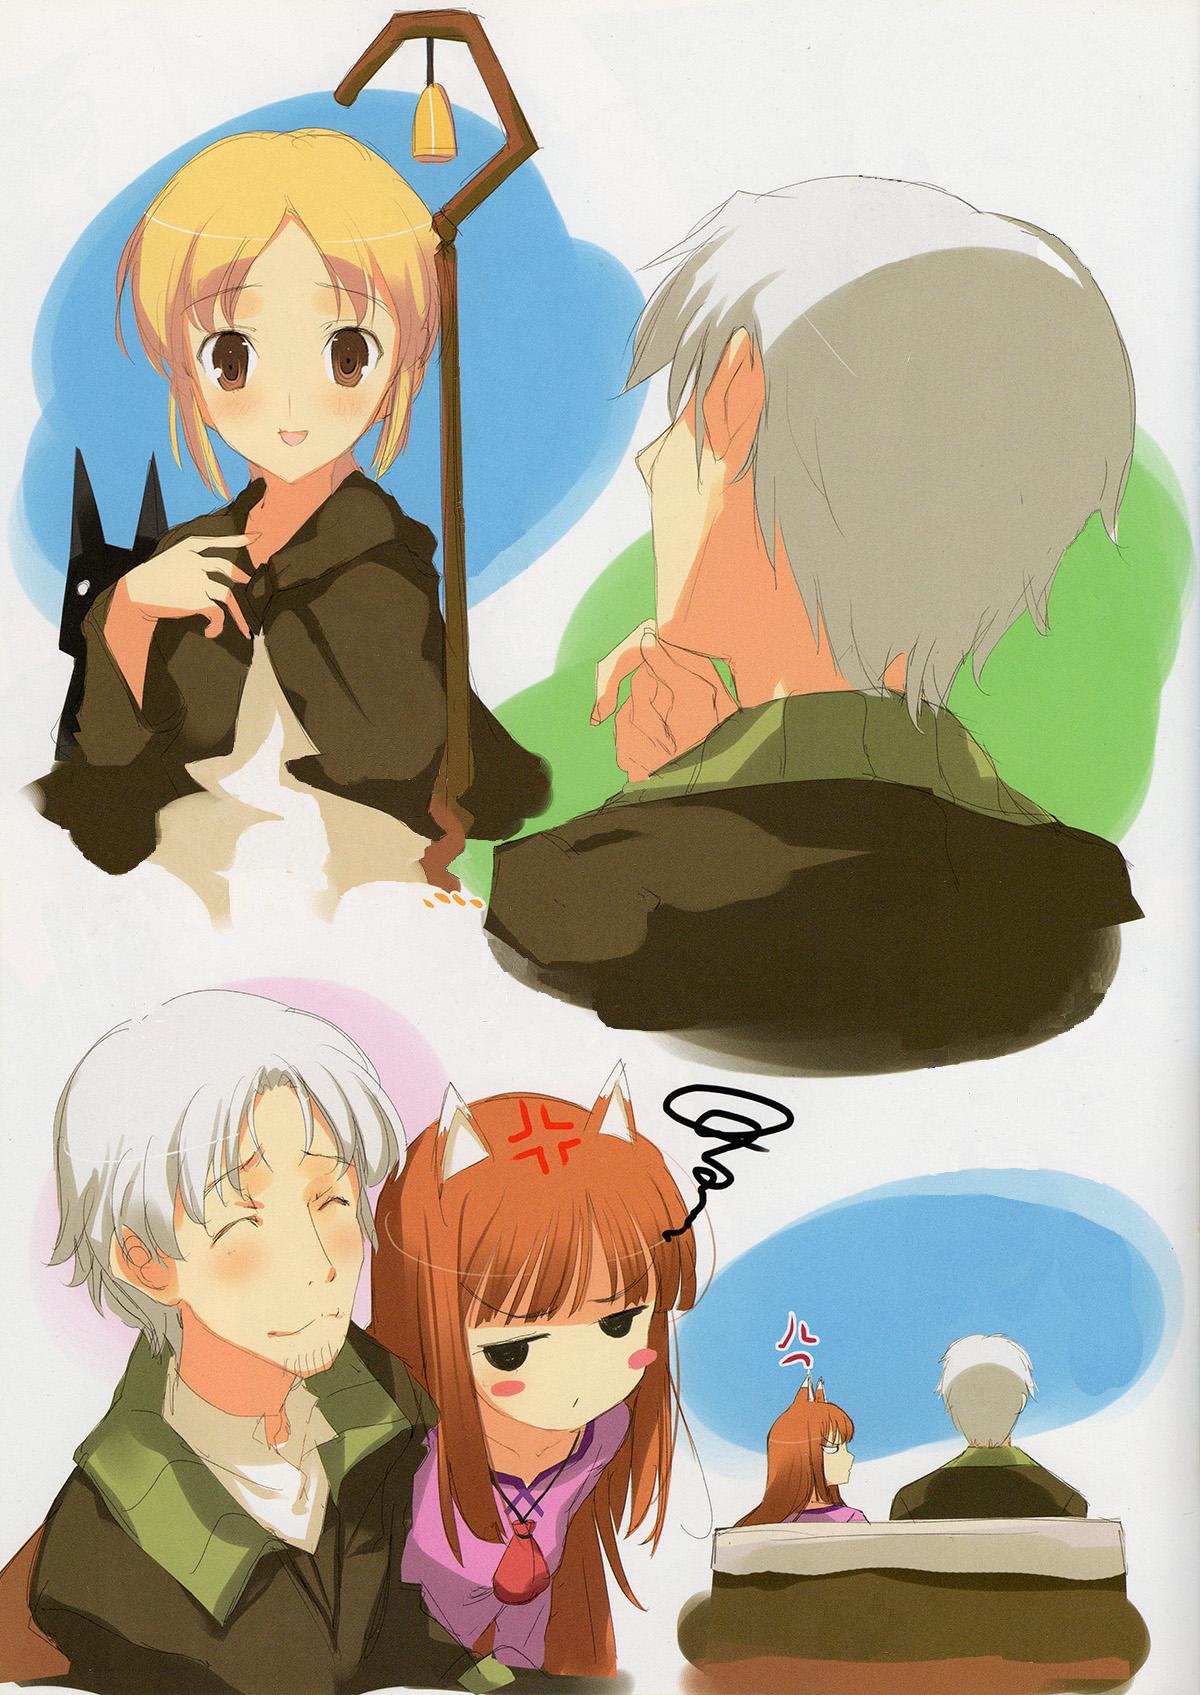 Groupsex Ookami no Kimagure Hon - Spice and wolf Trap - Page 4